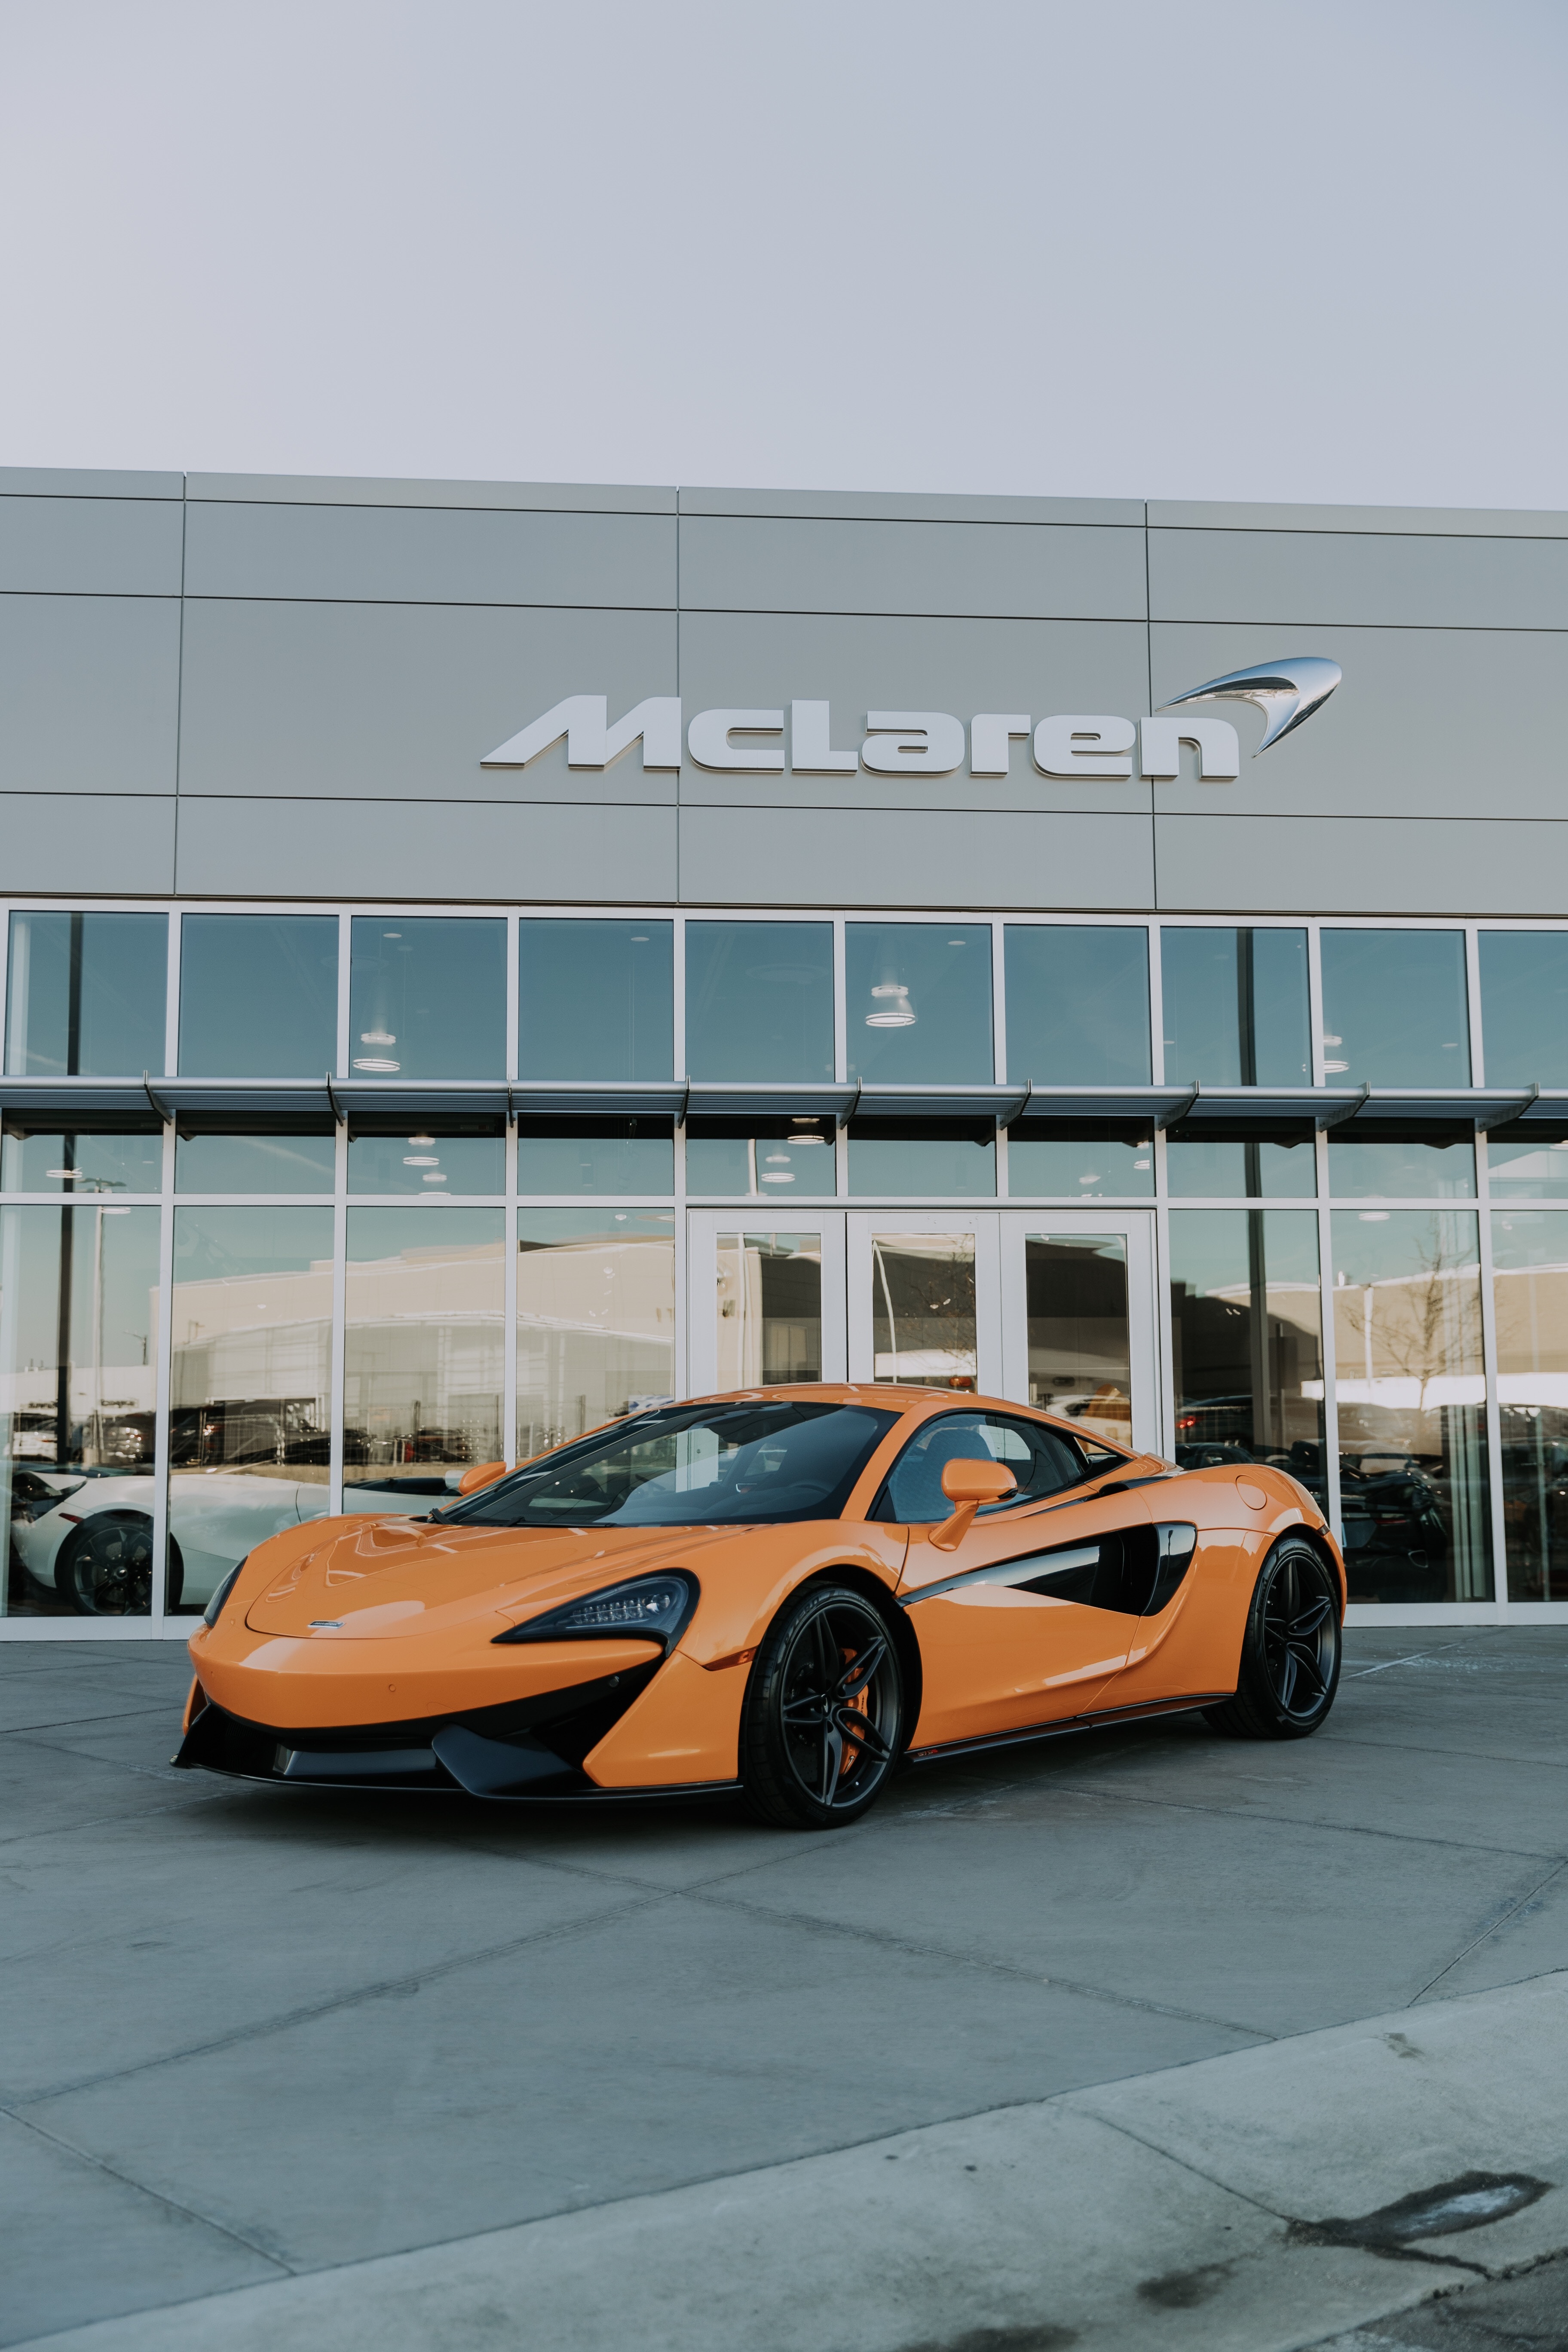 HD Mclaren Android Images